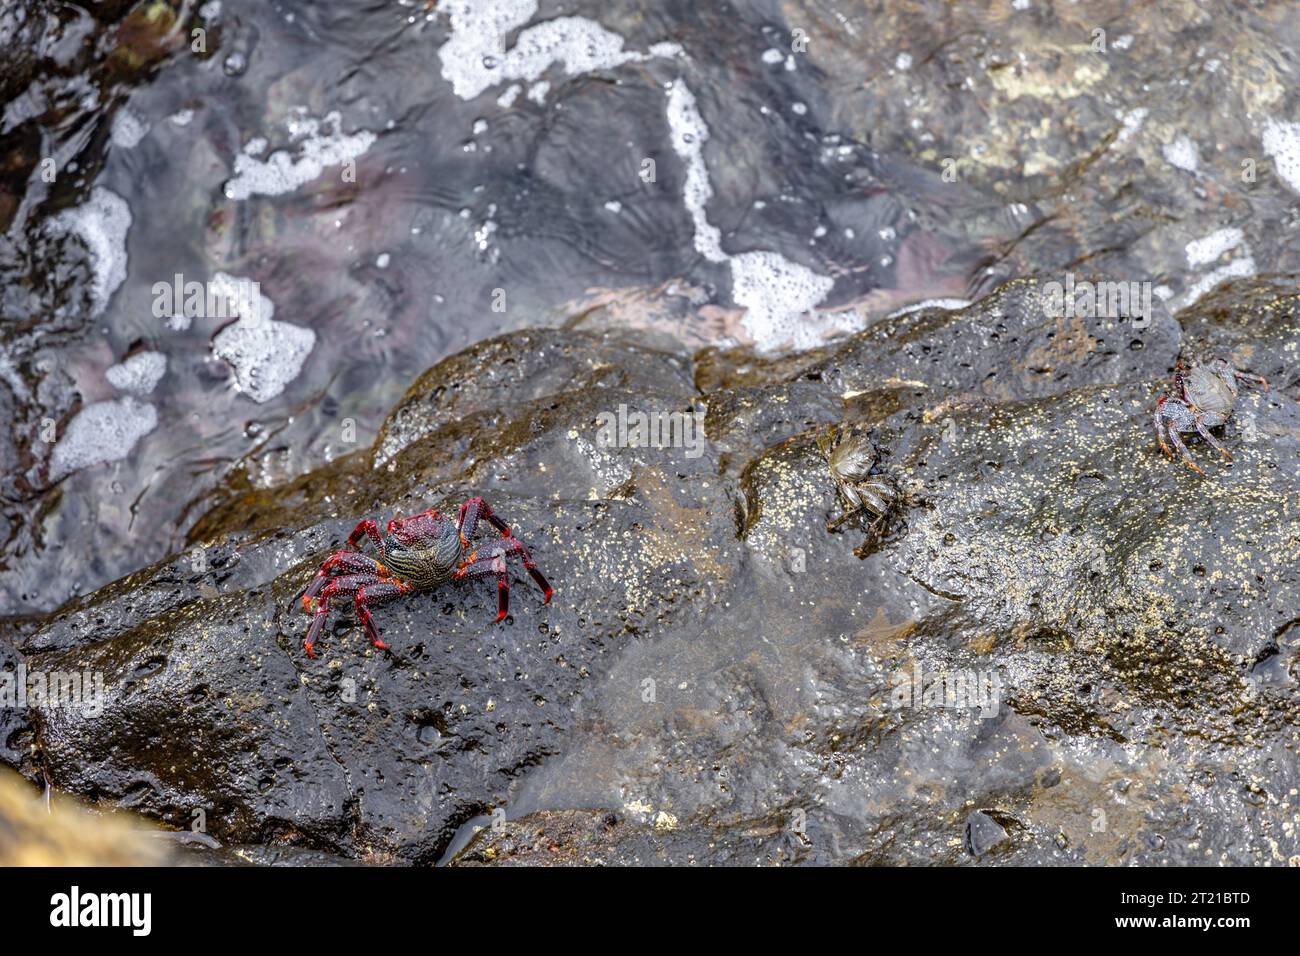 Crabs on the ocean shore, seafood delicacies of the Canary Islands Spain Stock Photo